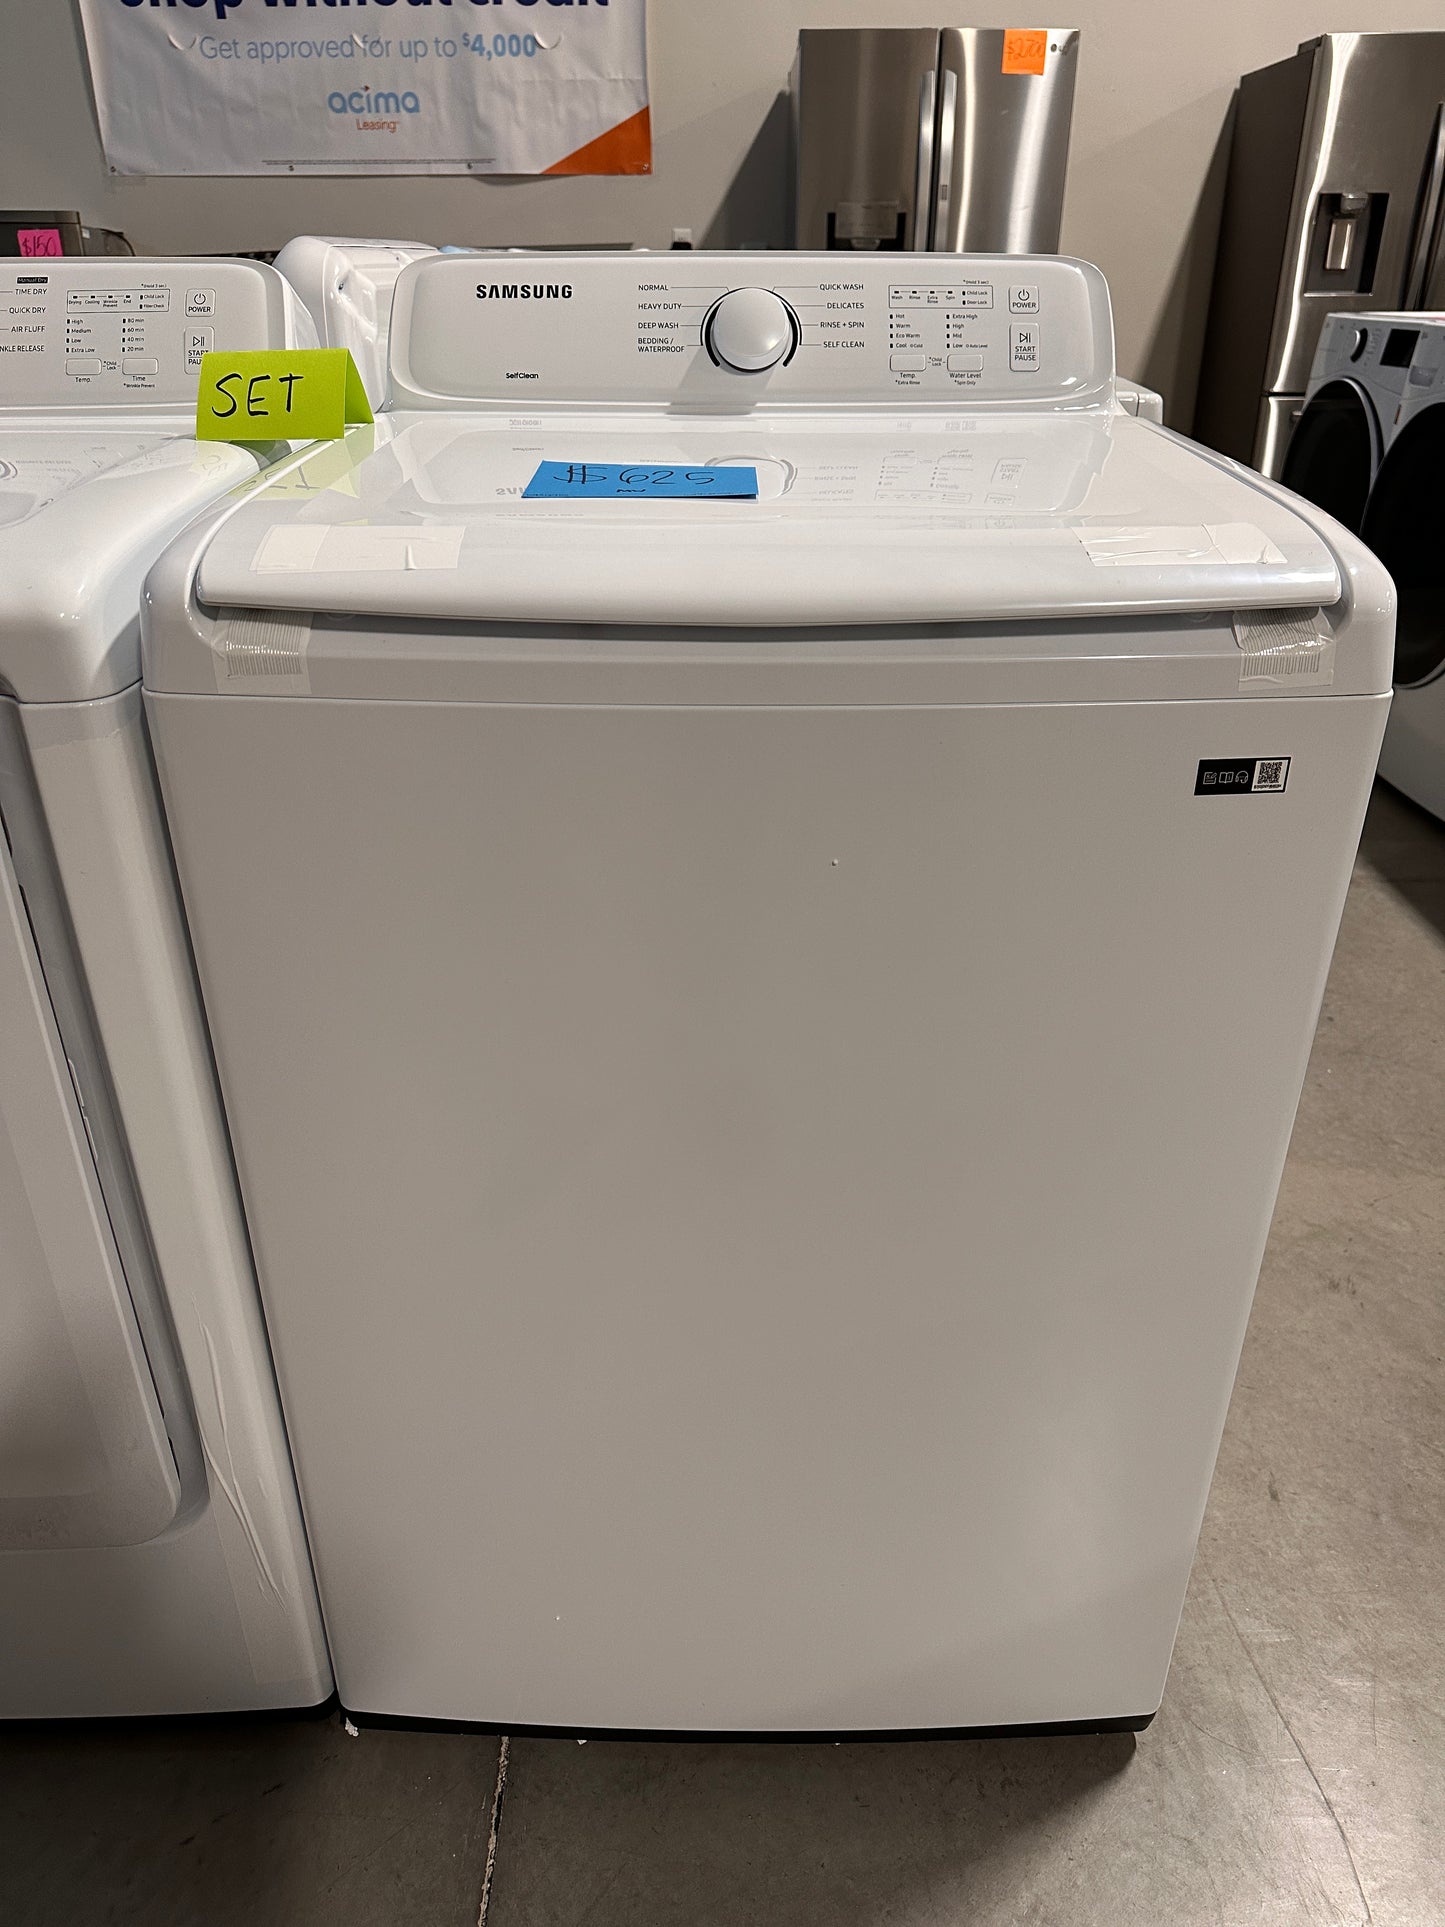 SAMSUNG TOP LOAD WASHER WITH ACTIVEWAVE AGITATOR - WAS12750